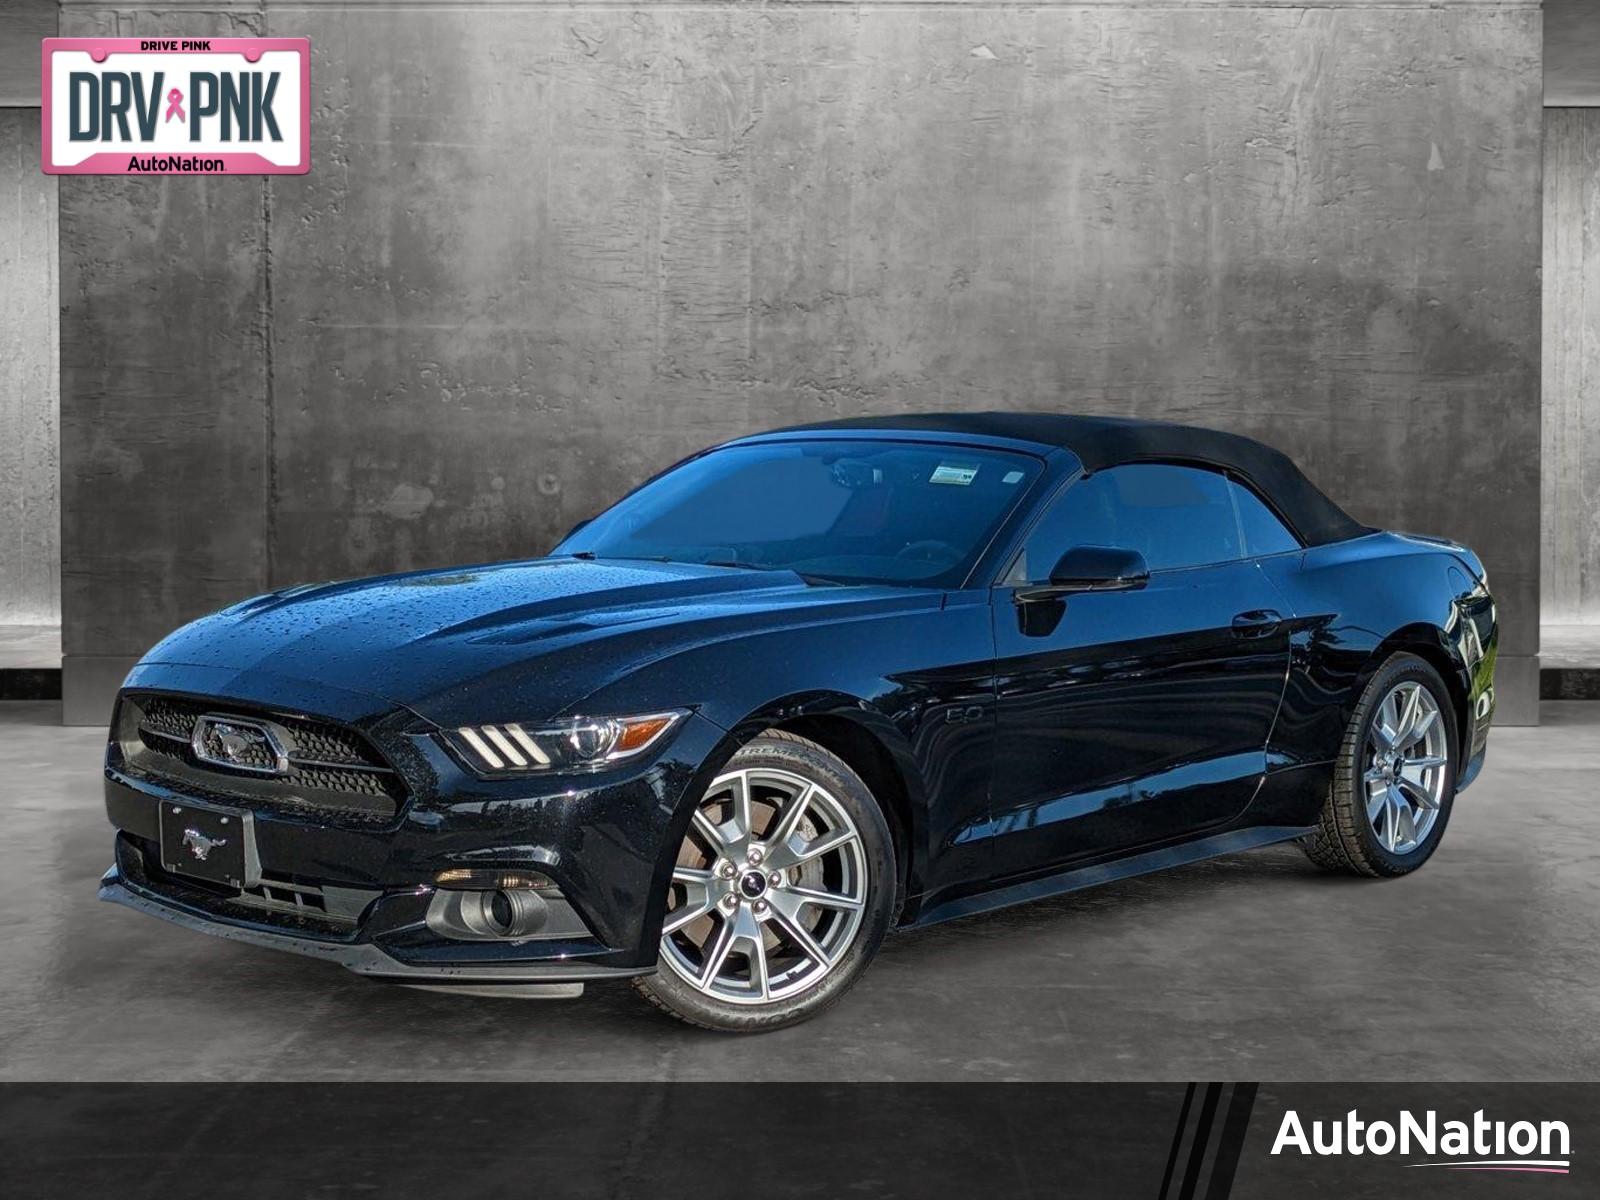 2015 Ford Mustang Vehicle Photo in Jacksonville, FL 32244